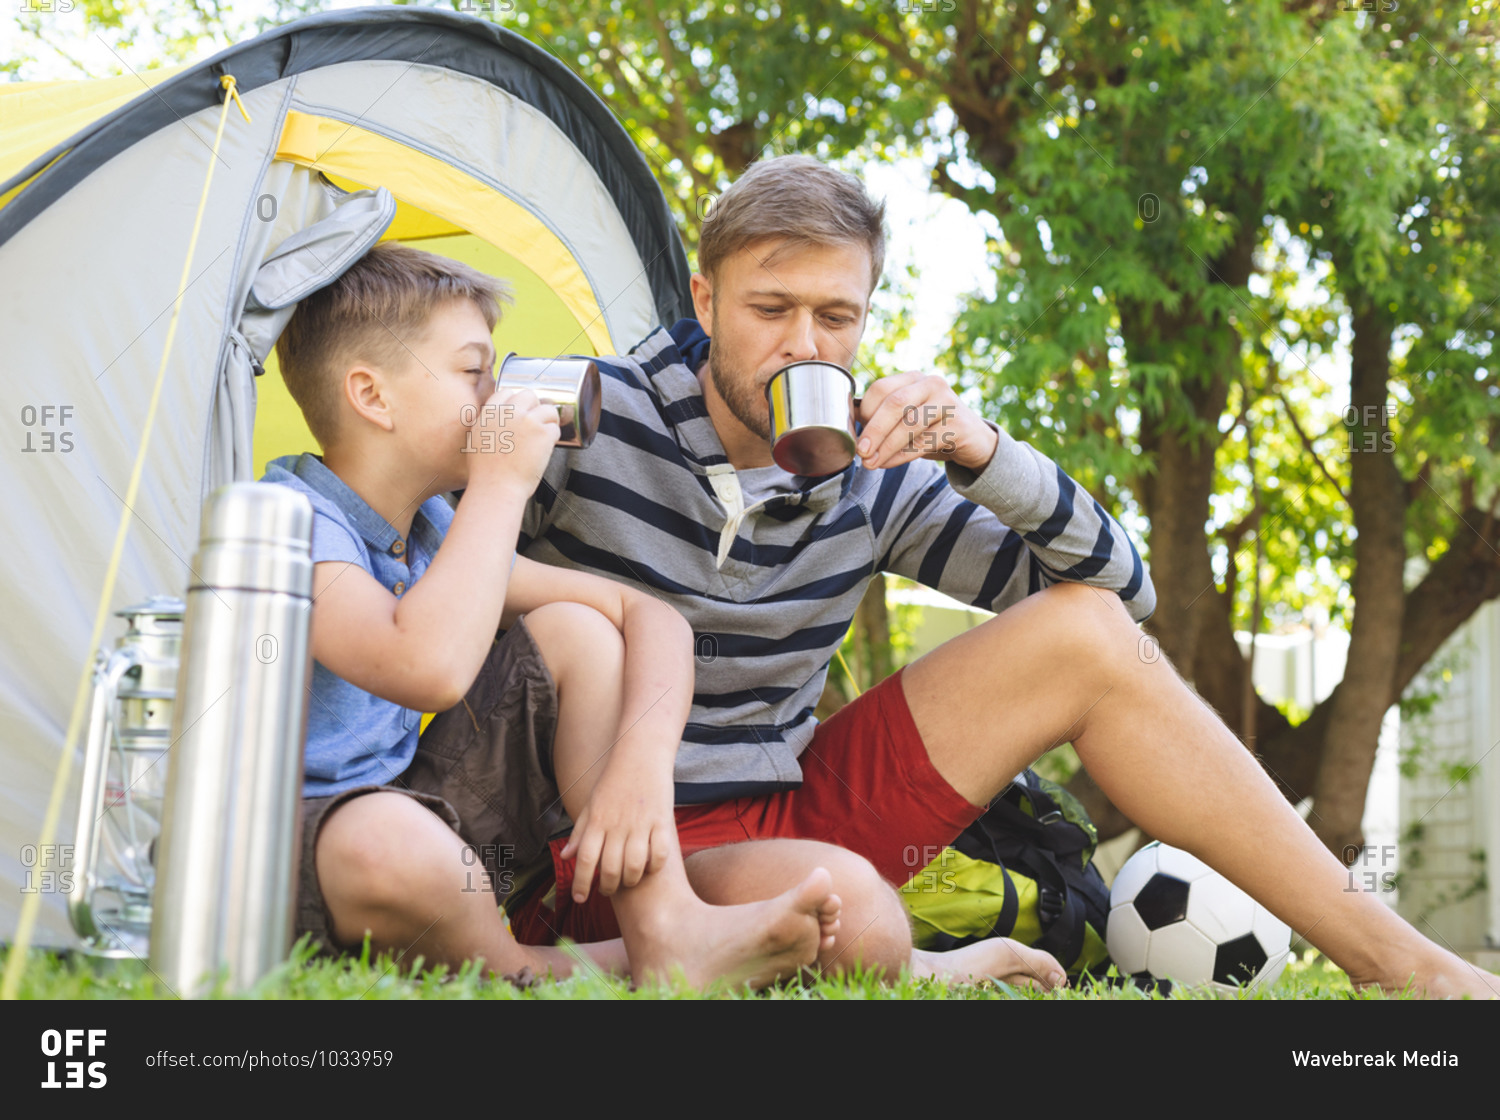 Caucasian man spending time with his son together, camping in garden, sitting in tent, drinking tea. Social distancing during Covid 19 Coronavirus quarantine lockdown.